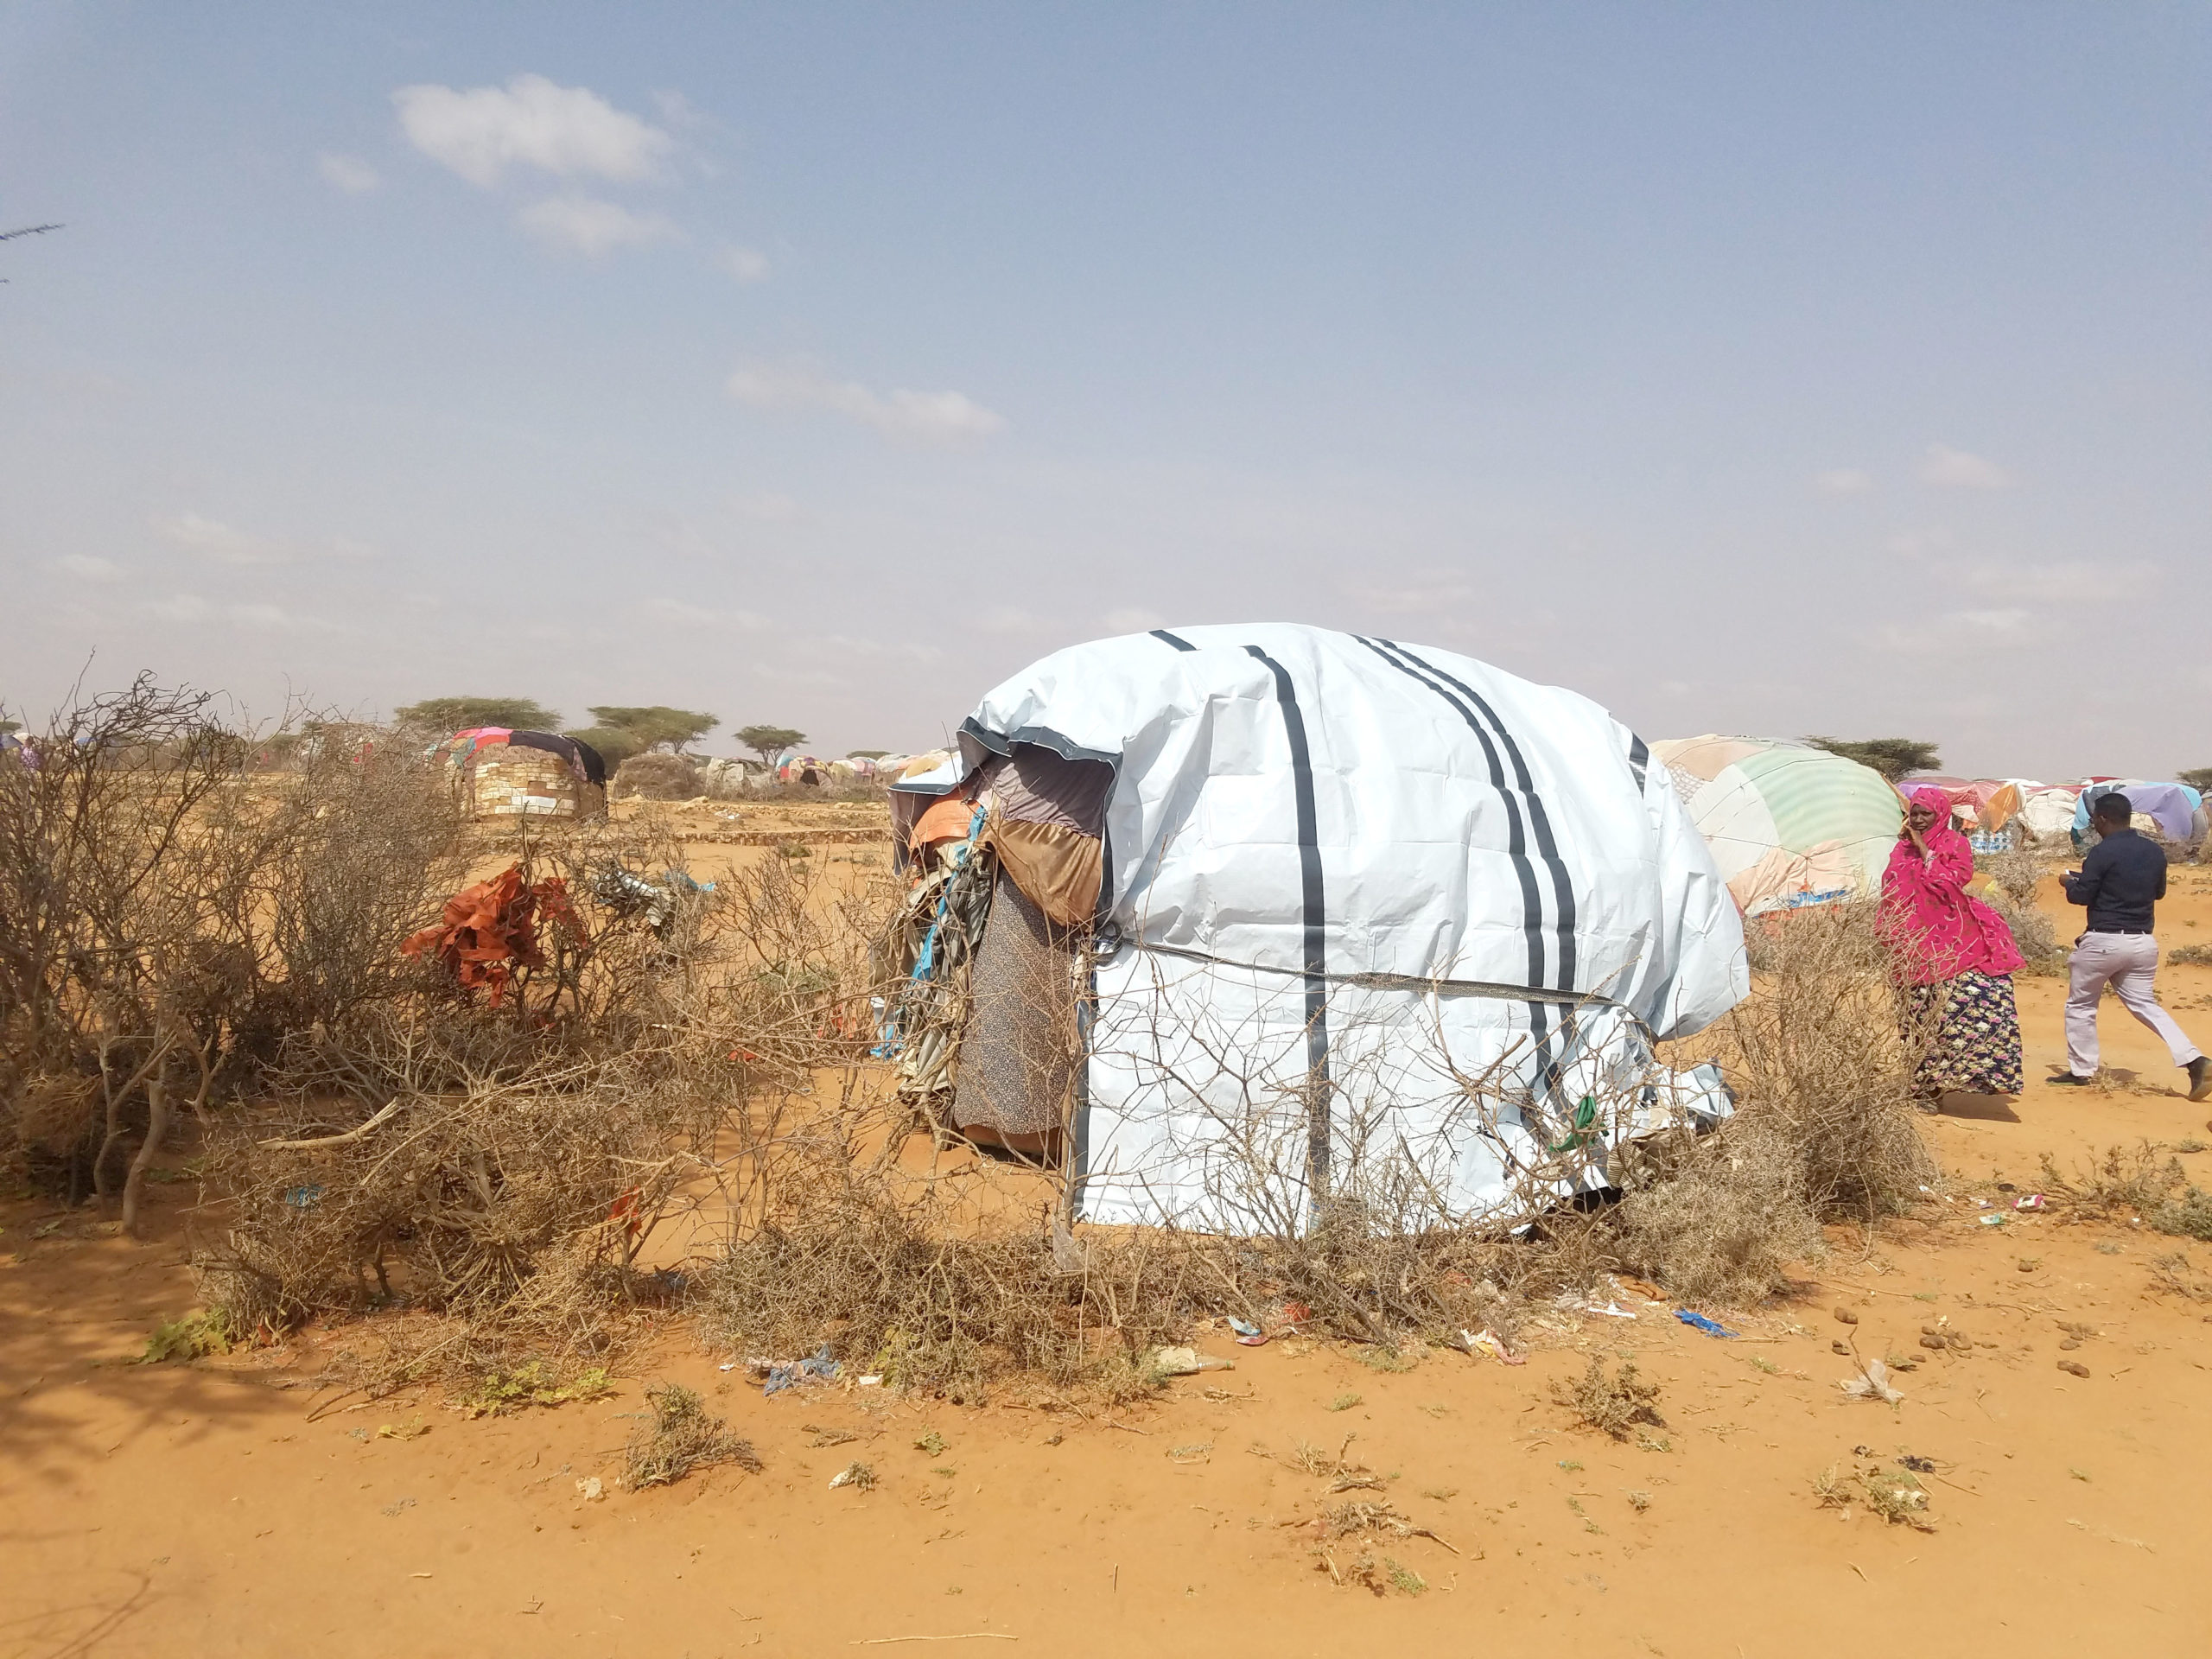 A small dome structure, reinforced with tarp in Somaliland